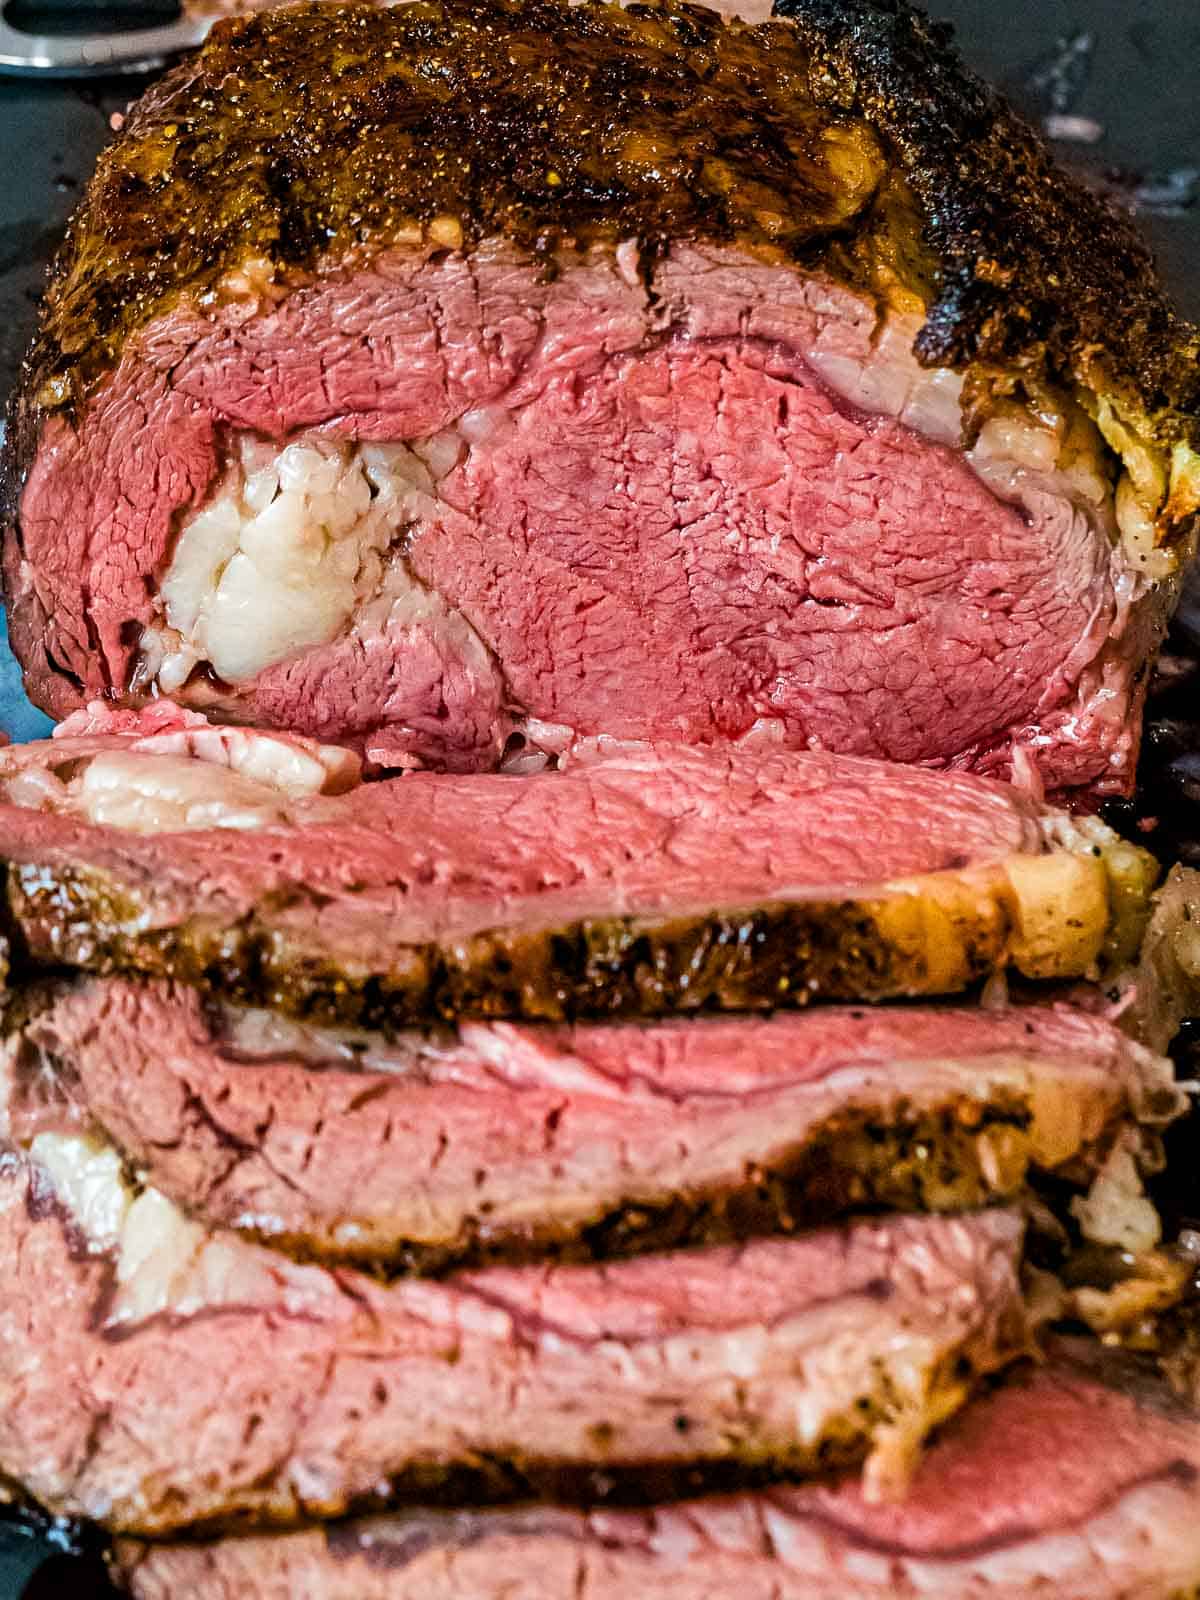 Prime rib roast cooked to medium and sliced on a dark cutting board showing a crispy, crackly crust made from a salt and pepper rub.